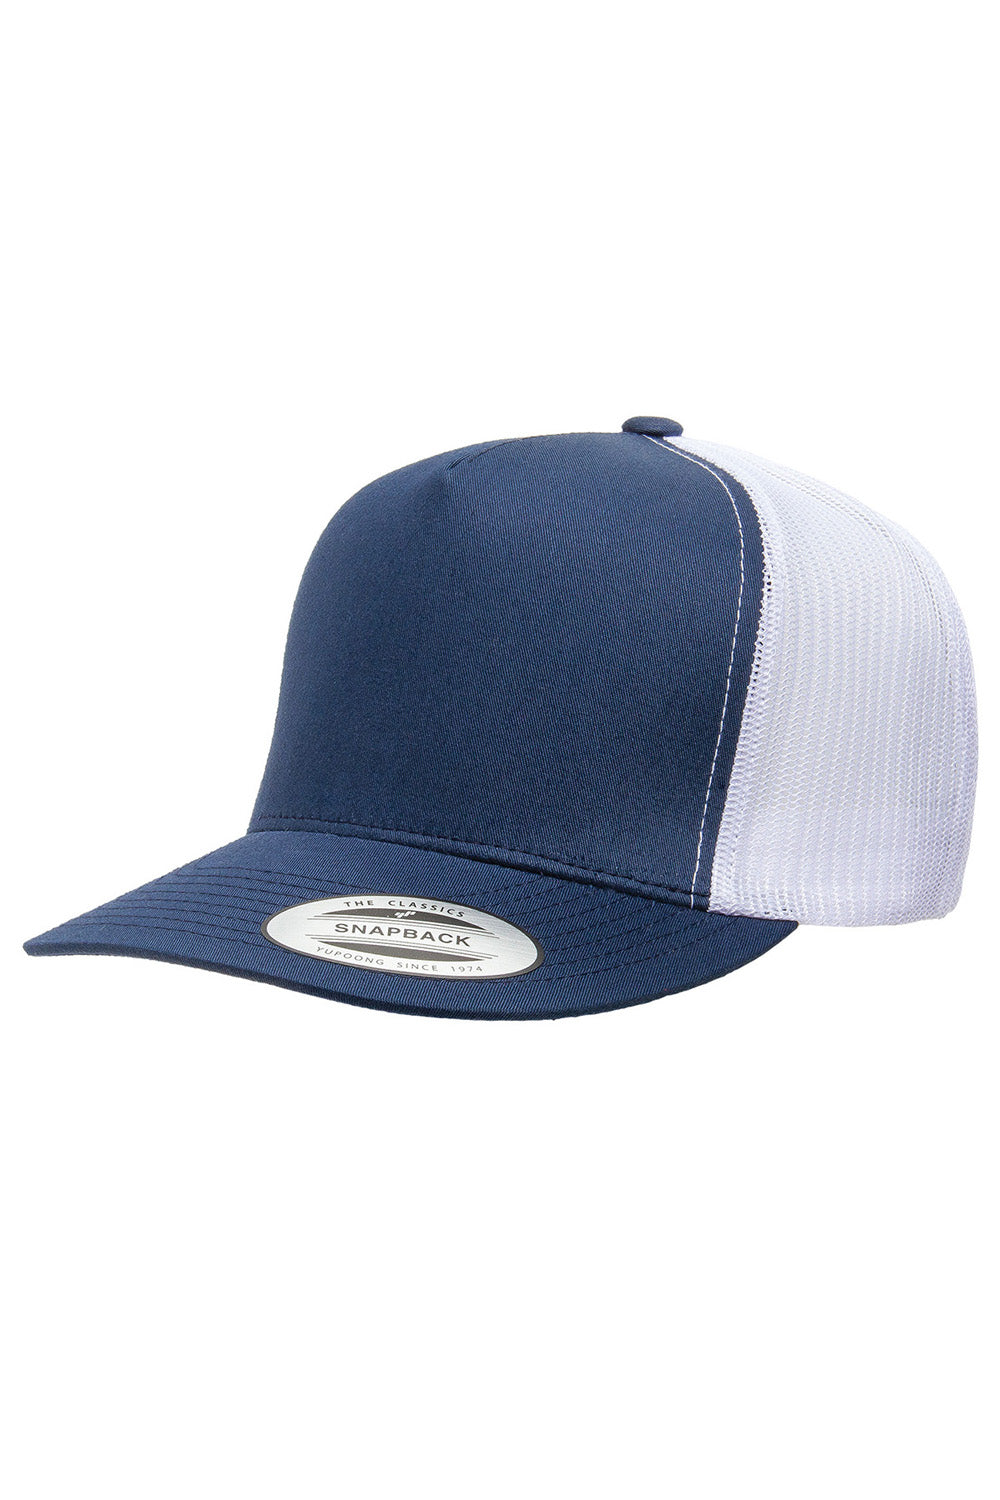 Yupoong 6006 Mens Adjustable Trucker Hat Navy Blue/White Front